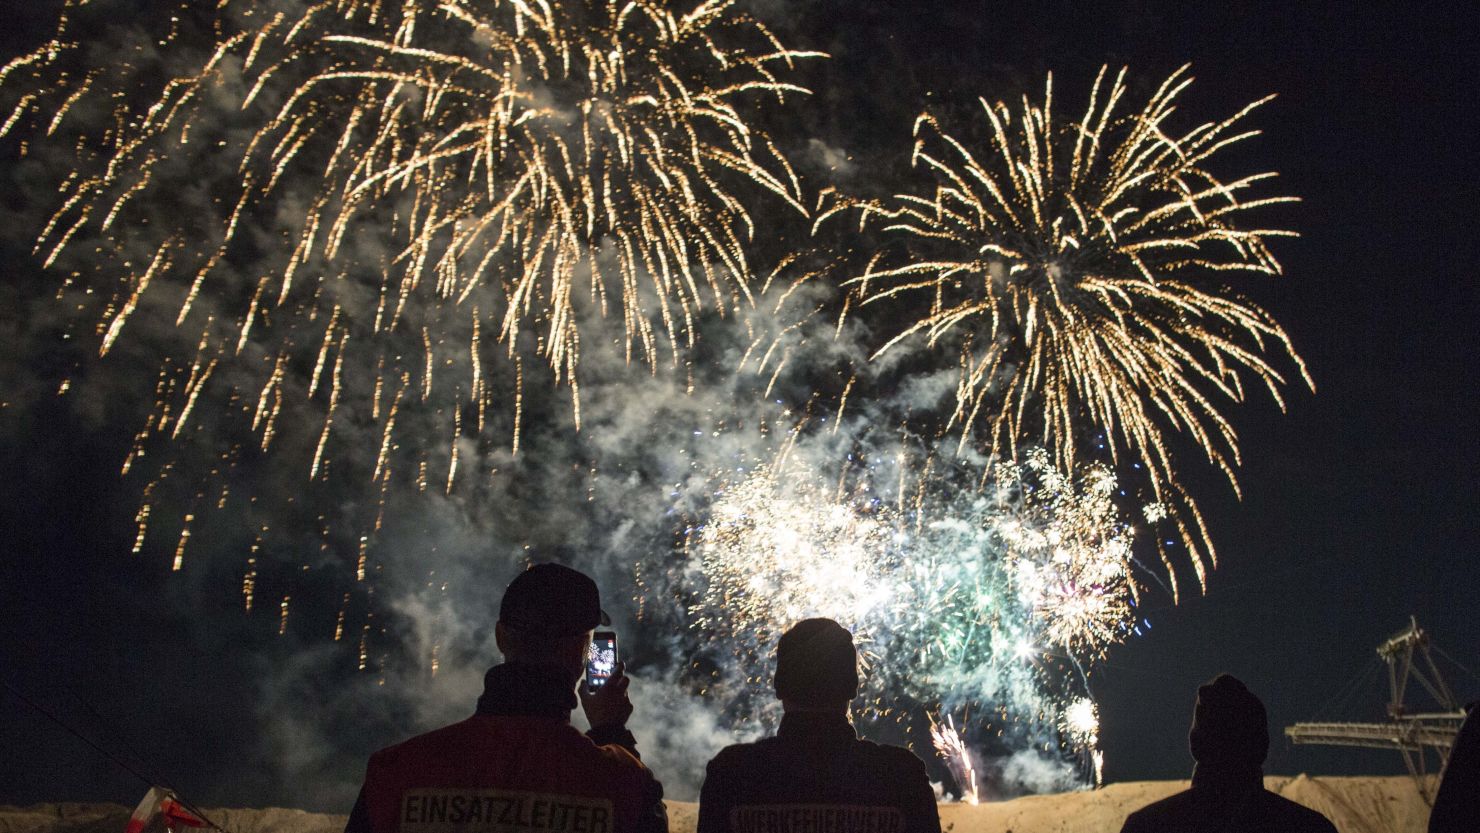 An aid group is asking New Year's revelers to "refrain from using very loud fireworks in close proximity to refugee shelters." The group and government officials cite fire and trauma concerns.